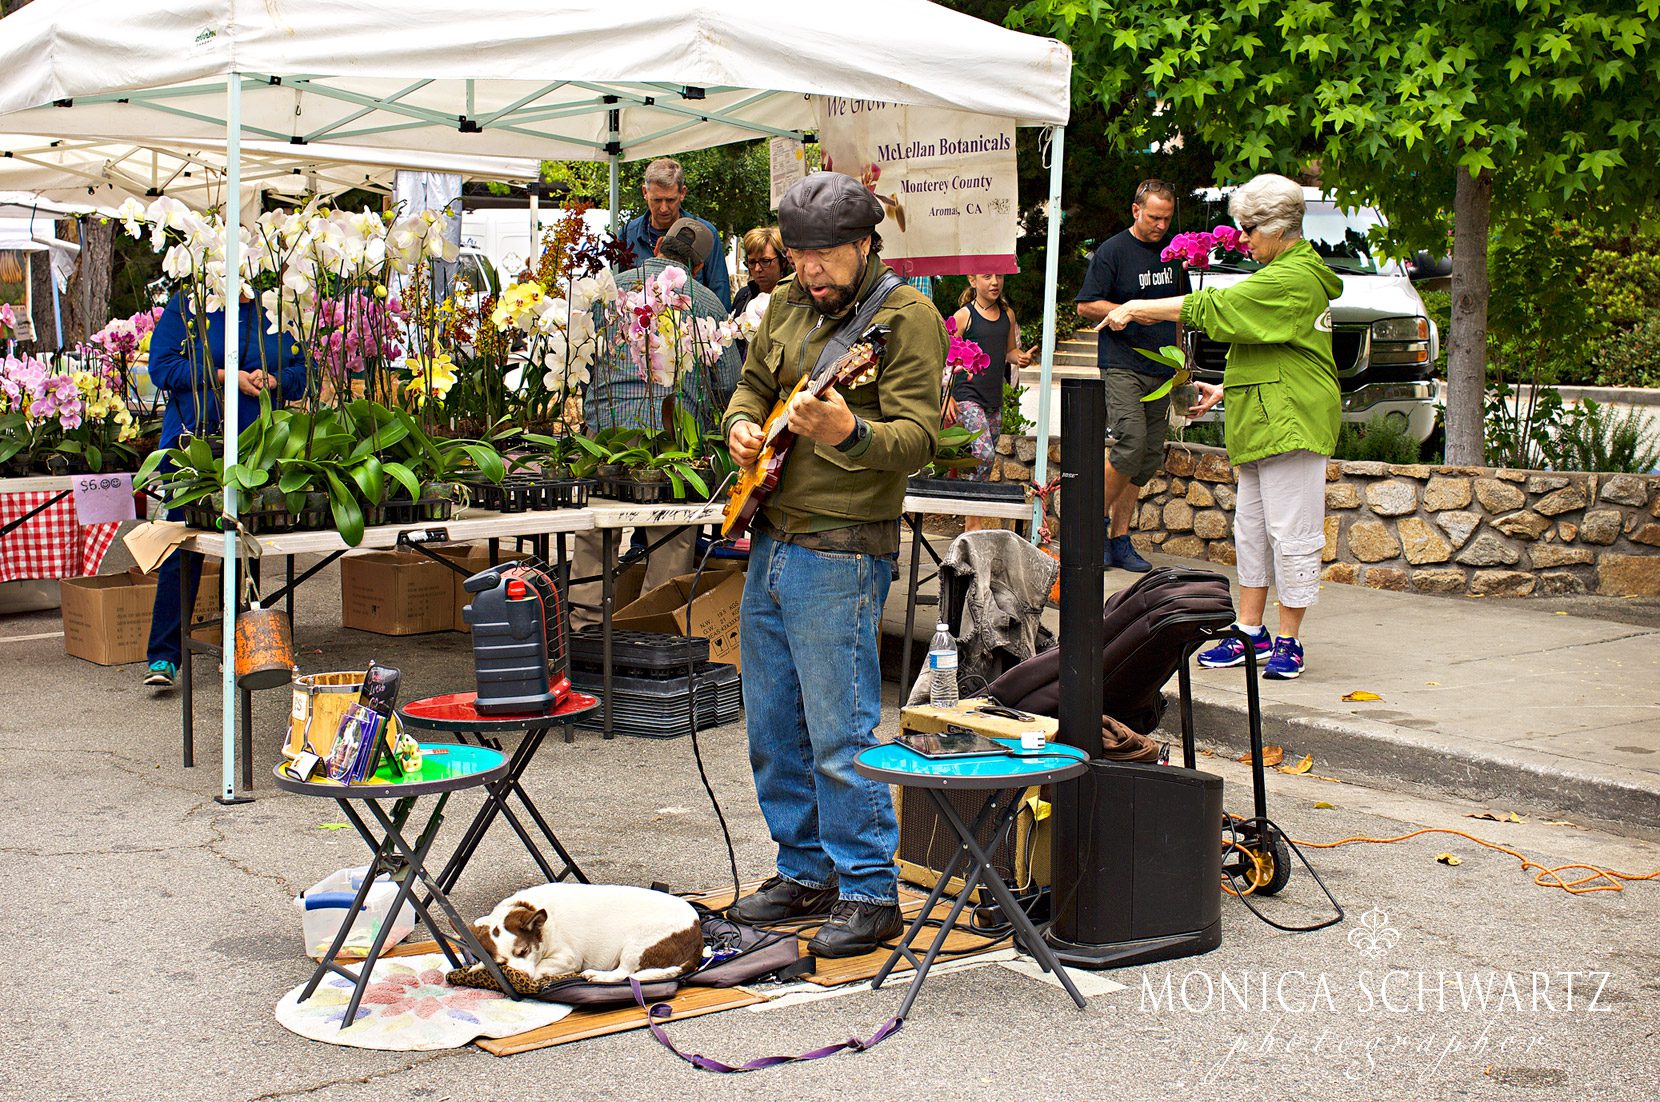 Musician-and-his-dog-at-the-farmers-market-in-Carmel-by-the-Sea-California